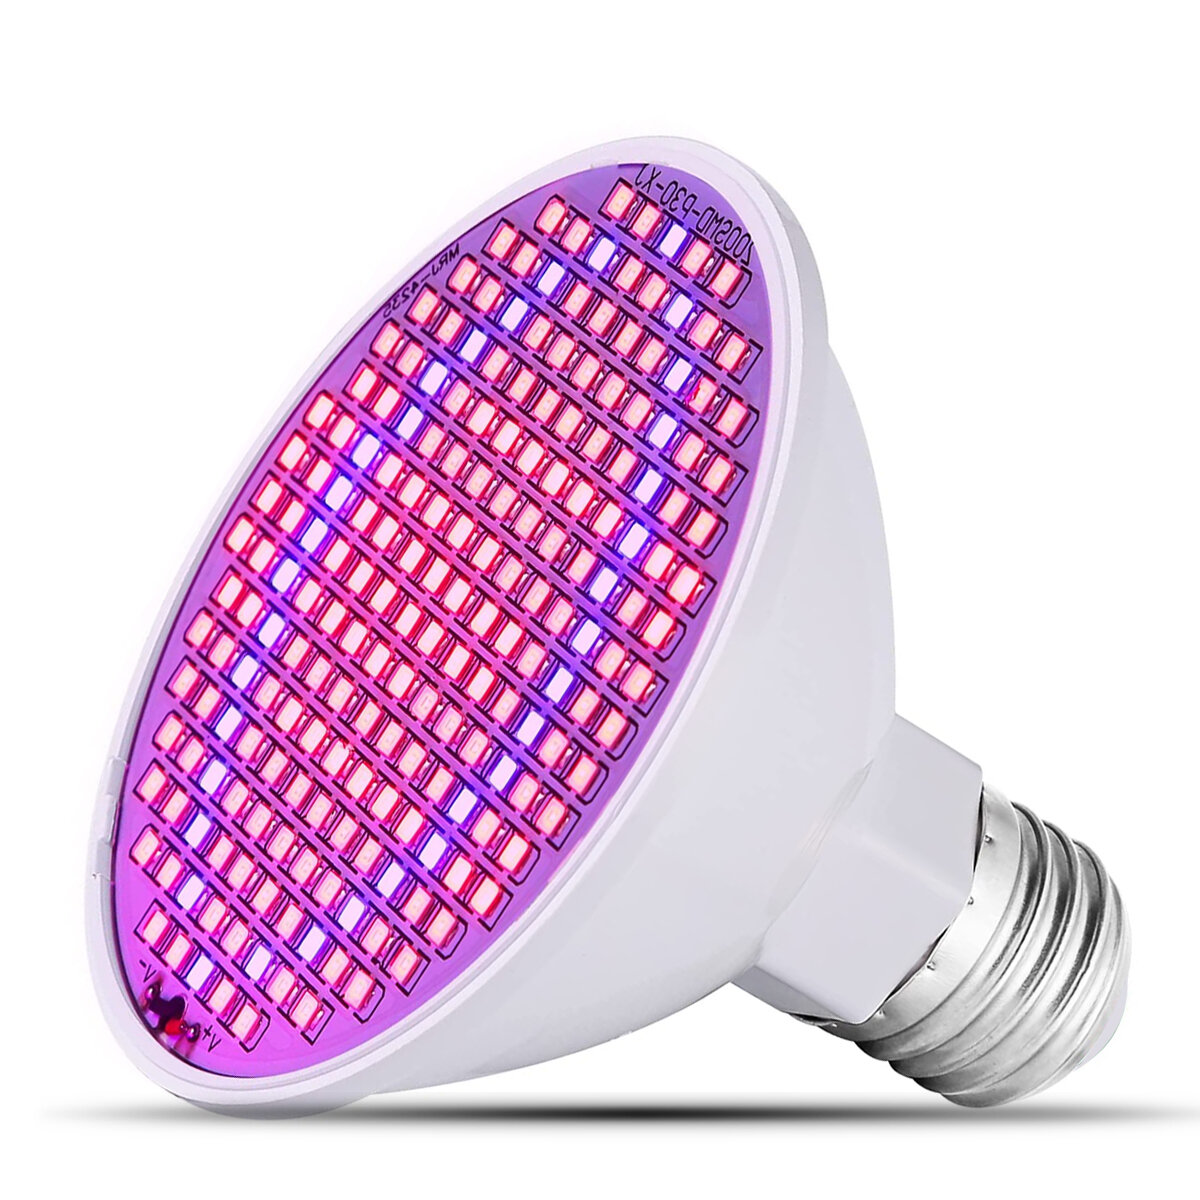 LED Grow Light Bulb 20W Plant Light with 200 LEDs E27 Base Grow Light Bulbs for Indoor Plants Vegetables Greenhouse and